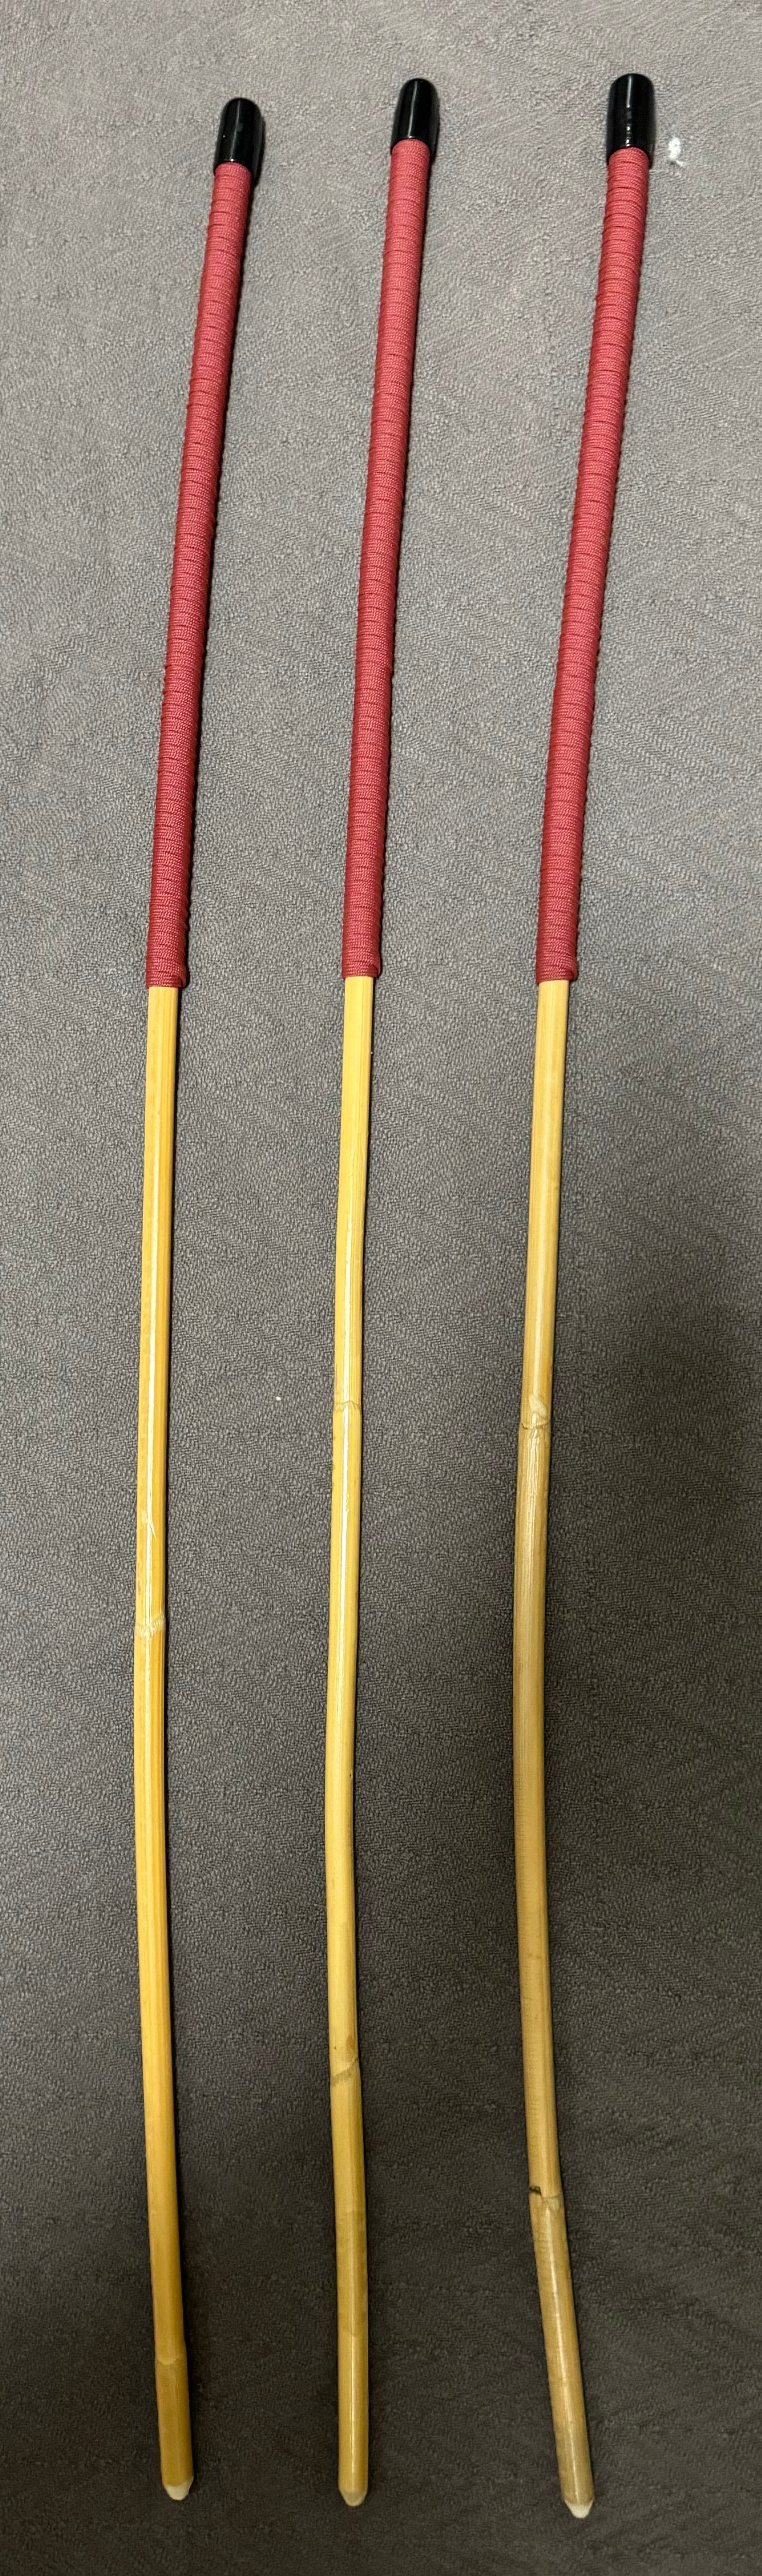 Set of 3 Classic Kooboo Rattan Punishment canes  with BRICK RED Paracord Handles - 82 to 84 cms L - 9 - 10 mm D - Englishvice Canes